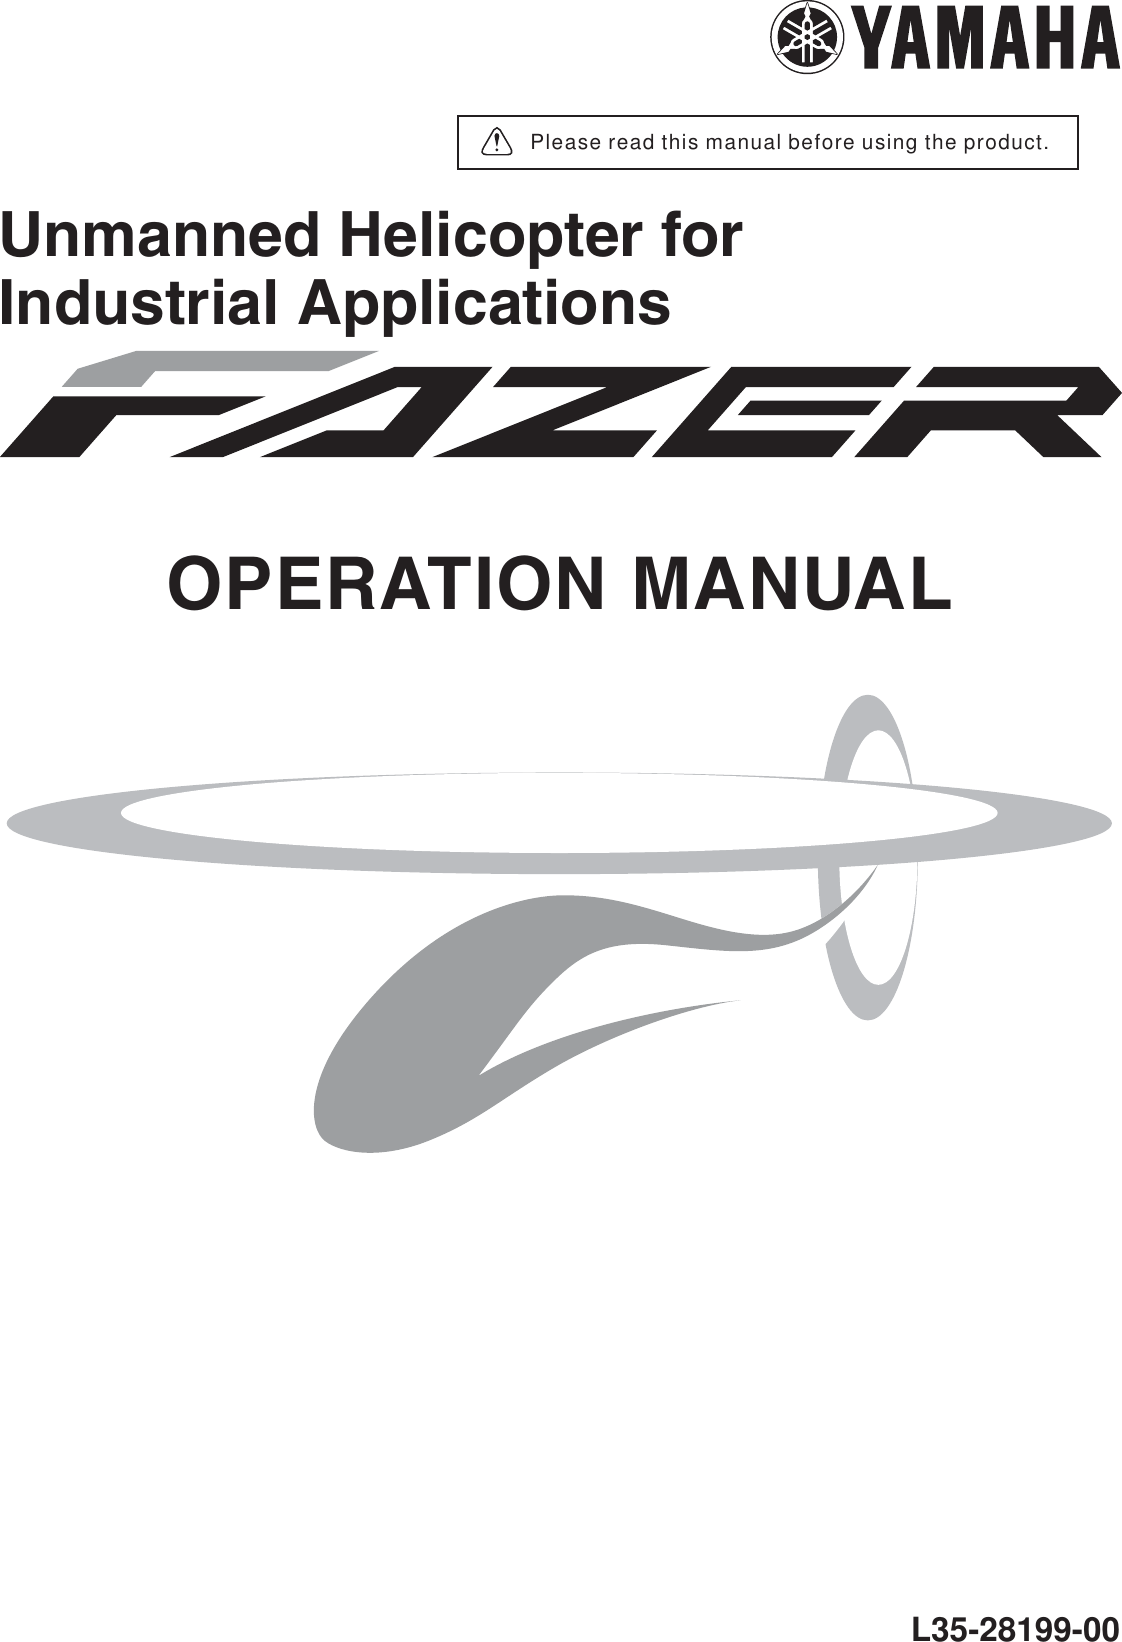 L35-28199-00Please read this manual before using the product.OPERATION MANUALUnmanned Helicopter for Industrial Applications